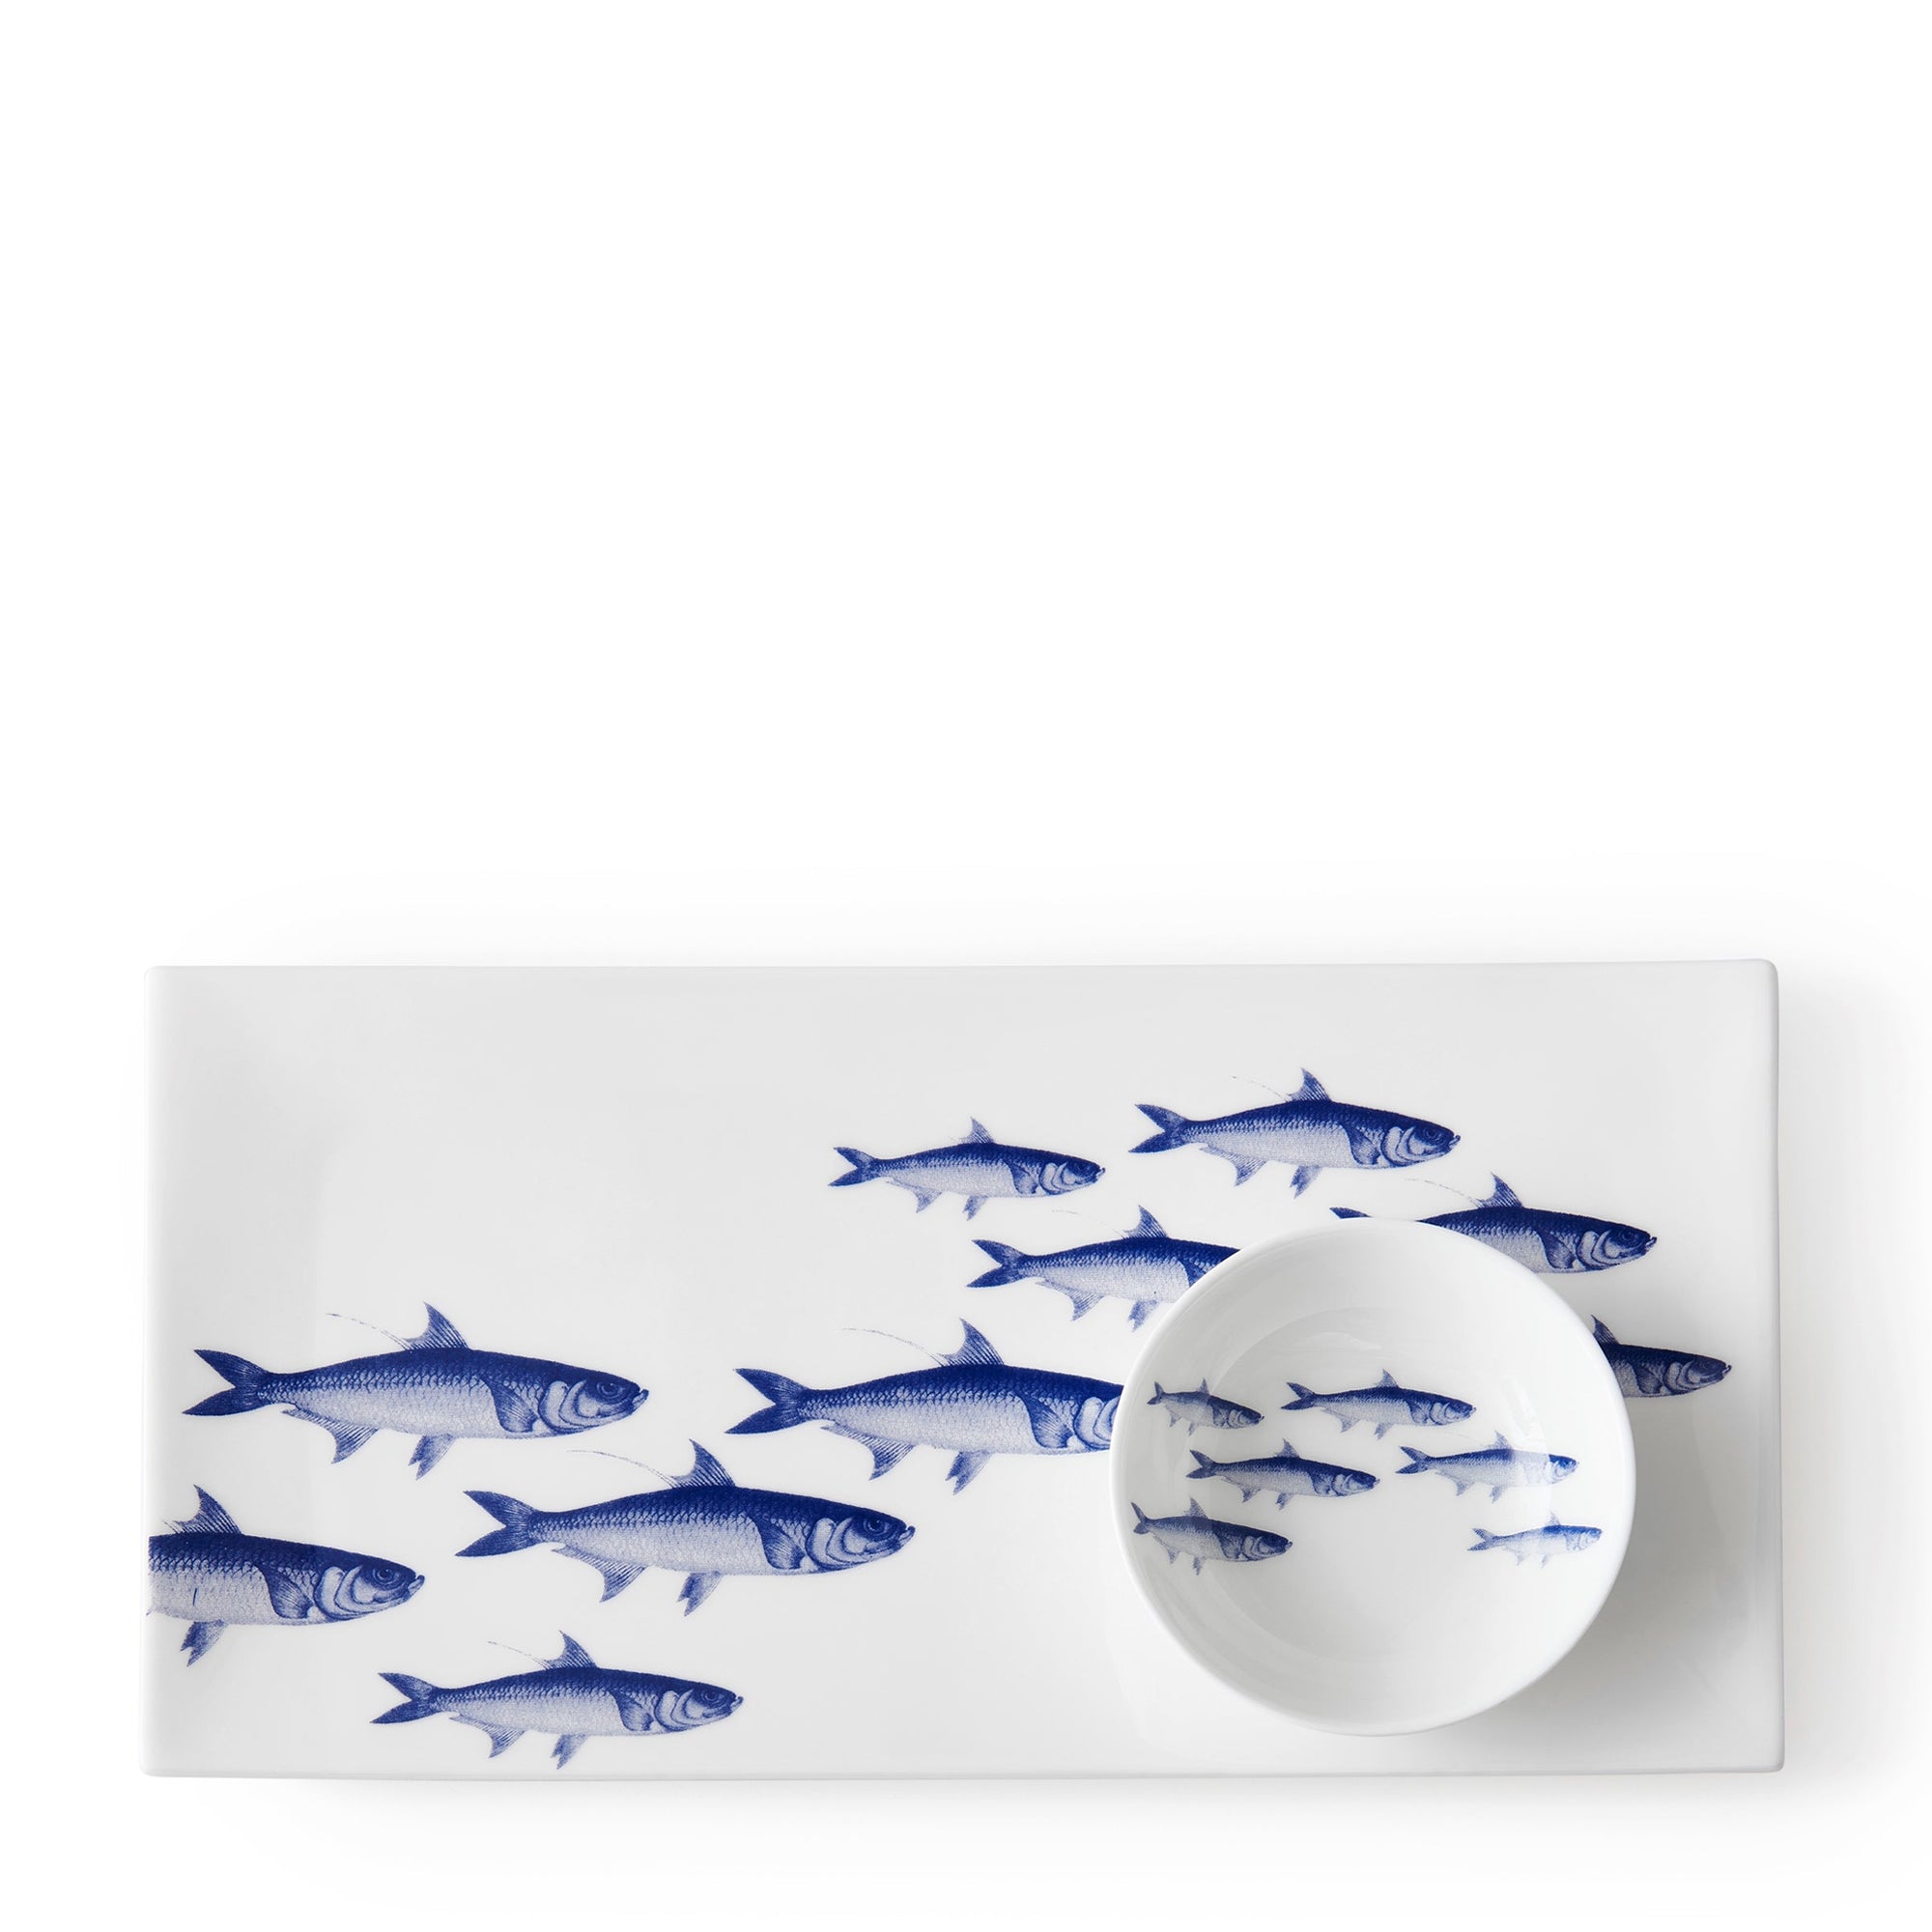 A rectangular white plate featuring an illustration of nine blue fish swimming diagonally from the bottom left to the top right is perfect for serving appetizers. The School of Fish Large Sushi Tray by Caskata adds a touch of elegance to any setting.